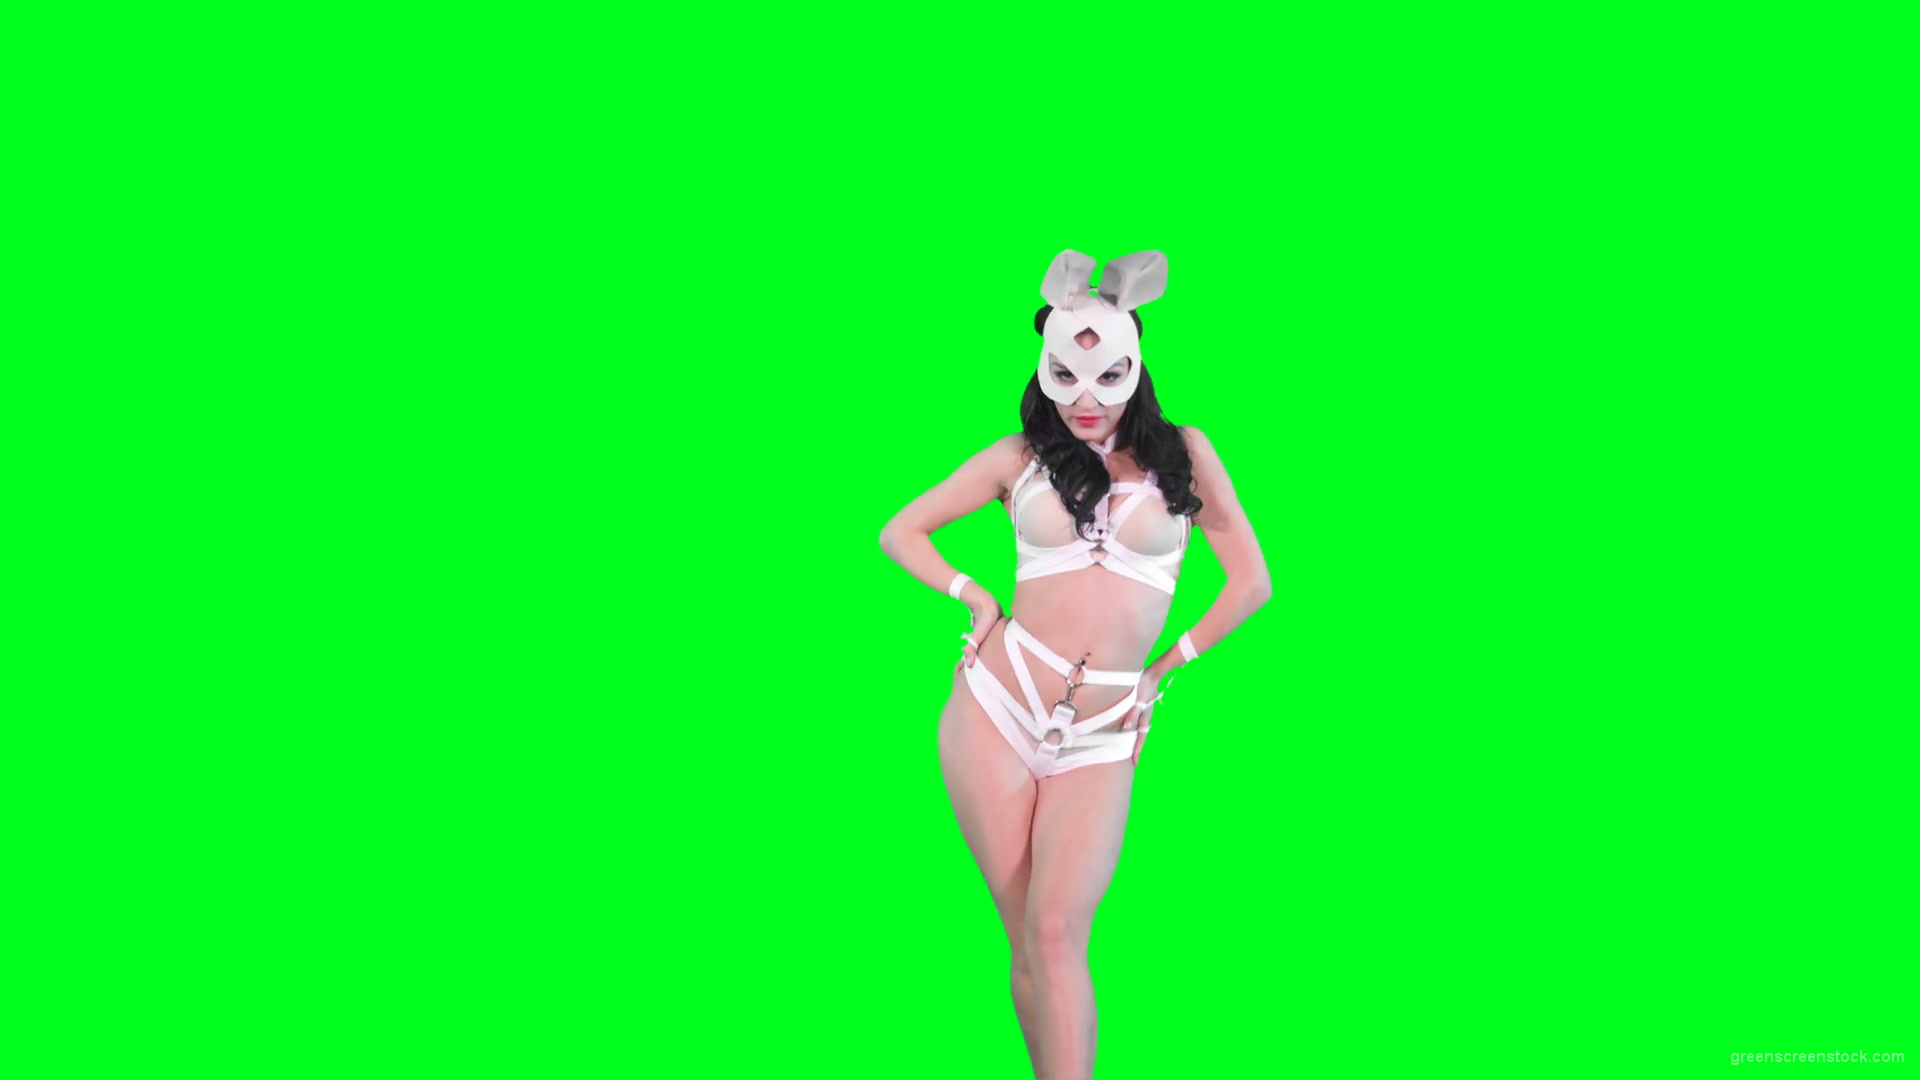 Go-go-Dancer-in-White-Rabbit-EDM-fetish-costume-making-sexy-moves-on-green-screen-4K-video-footage-1920_004 Green Screen Stock